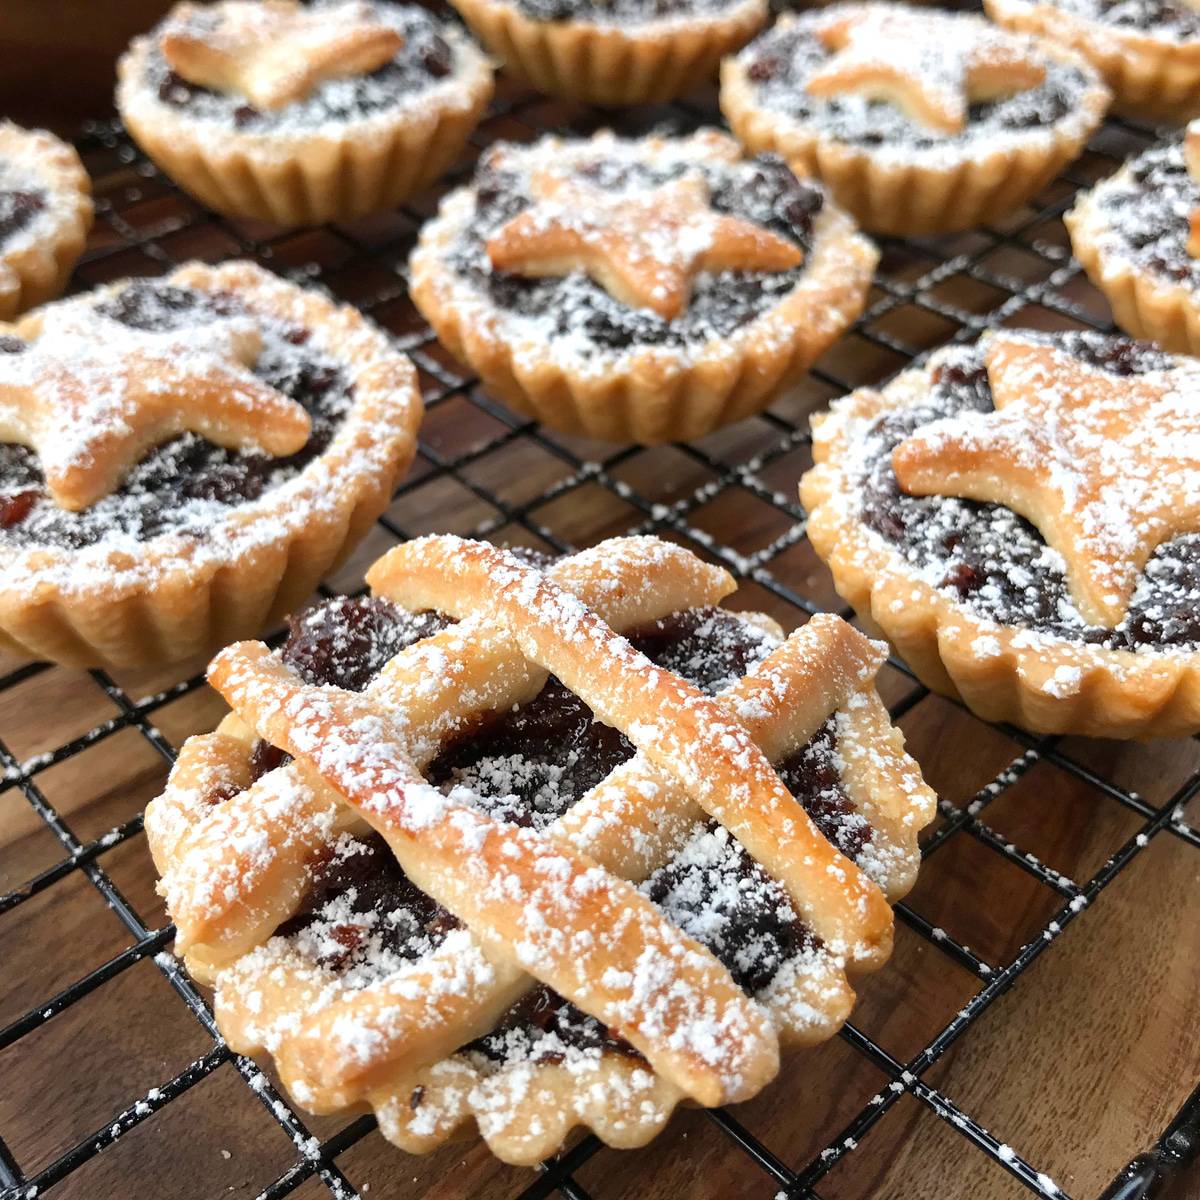 mince pies recipe best traditional authentic British English from scratch